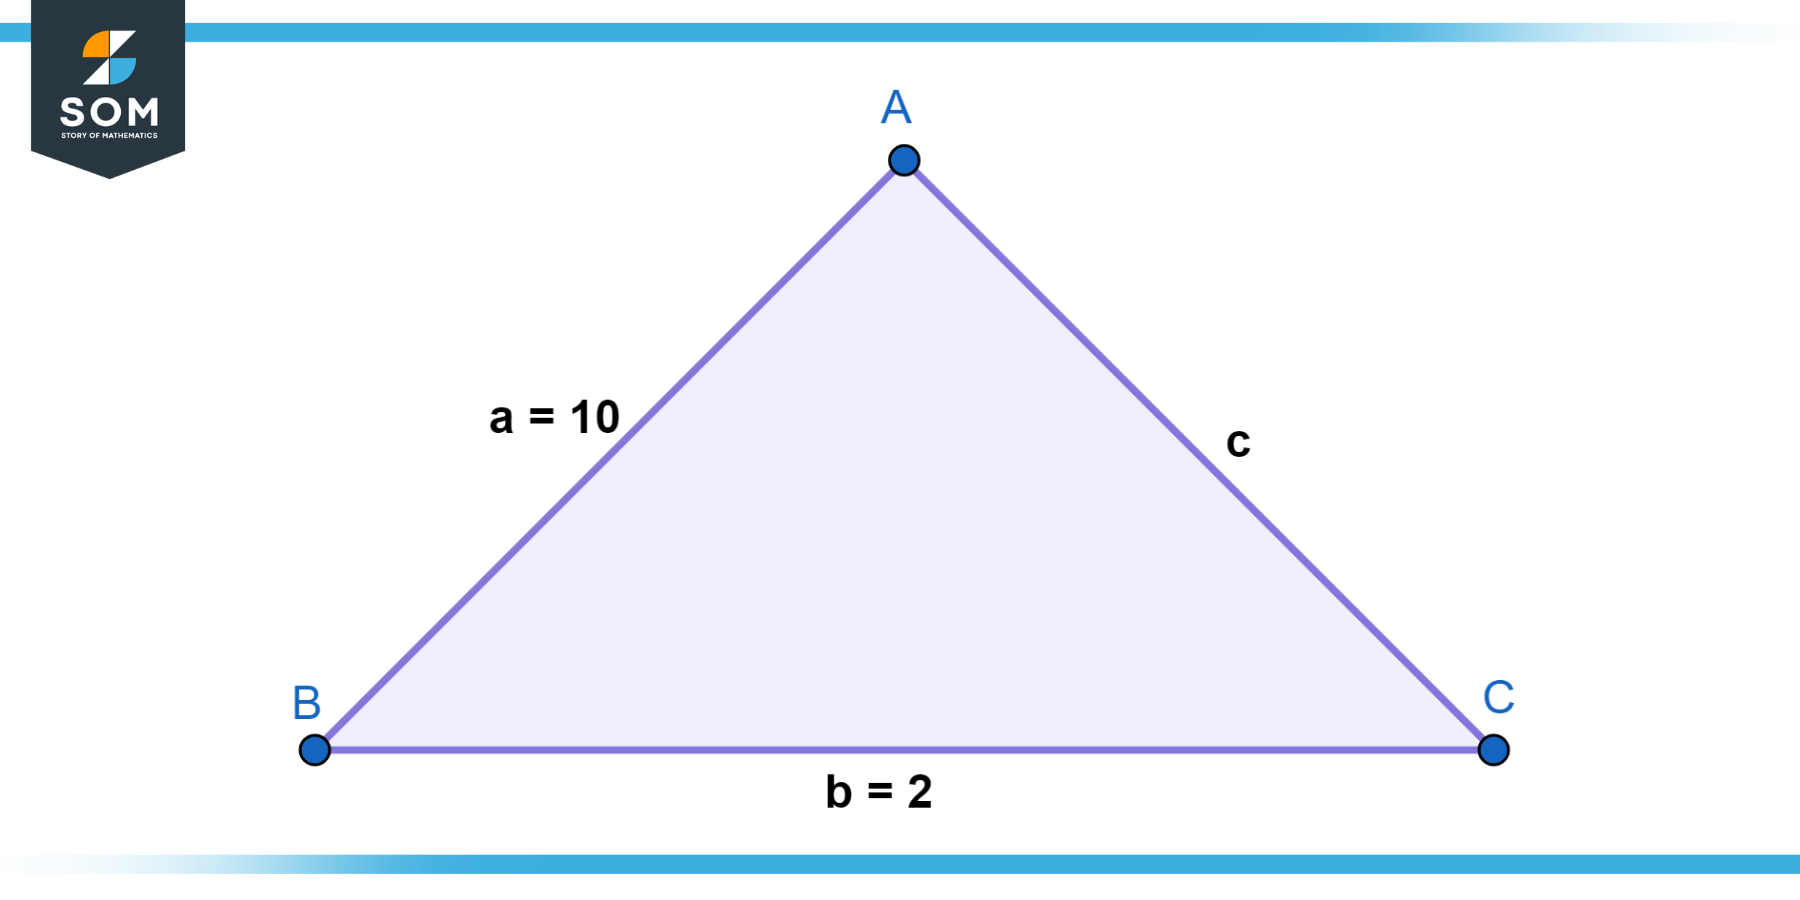 Generic representation of a triangle with sides a equals 10 and b equals 2